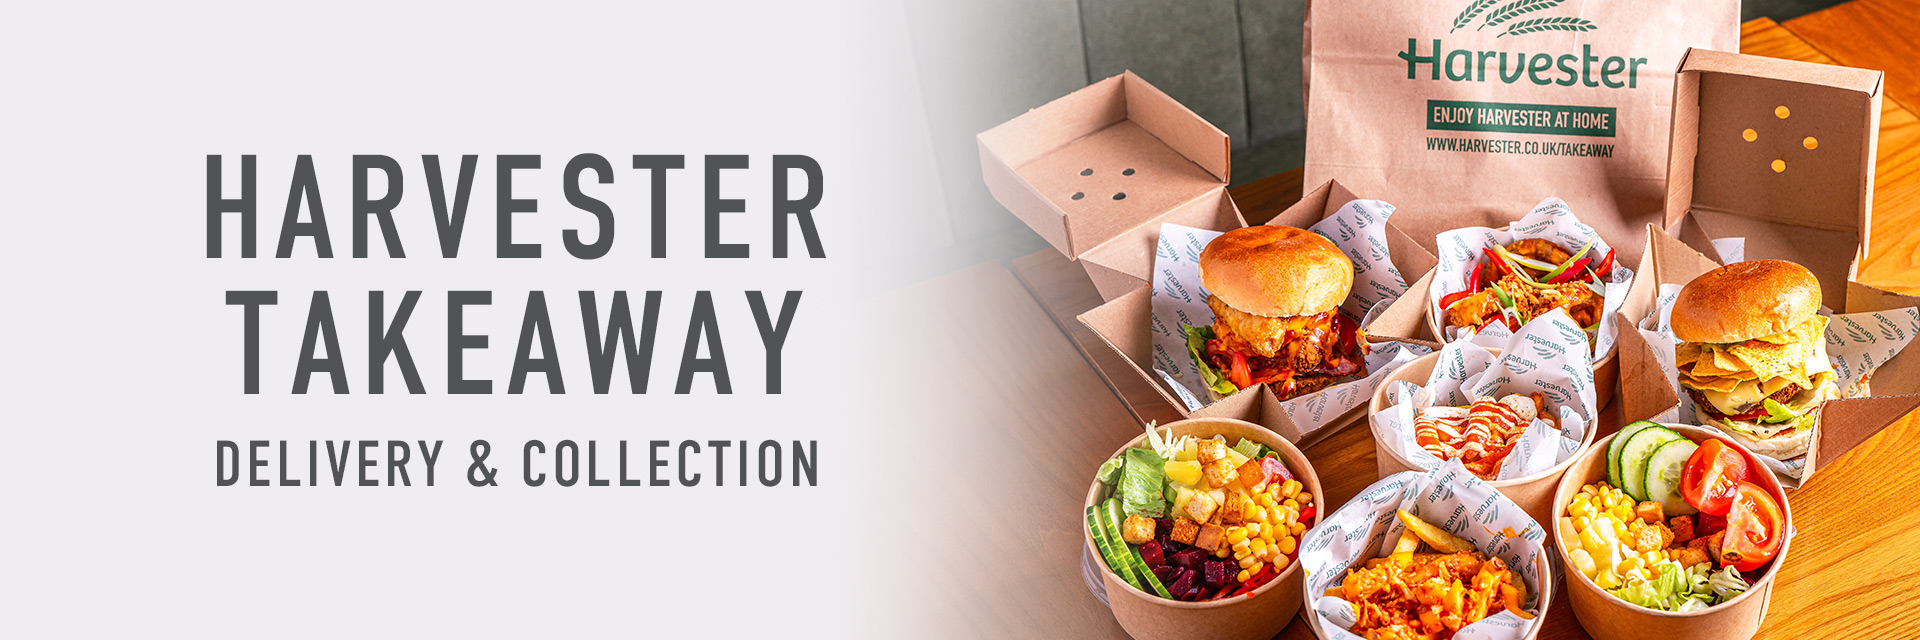 Harvester Llandarcy takeaway, delivery, collection